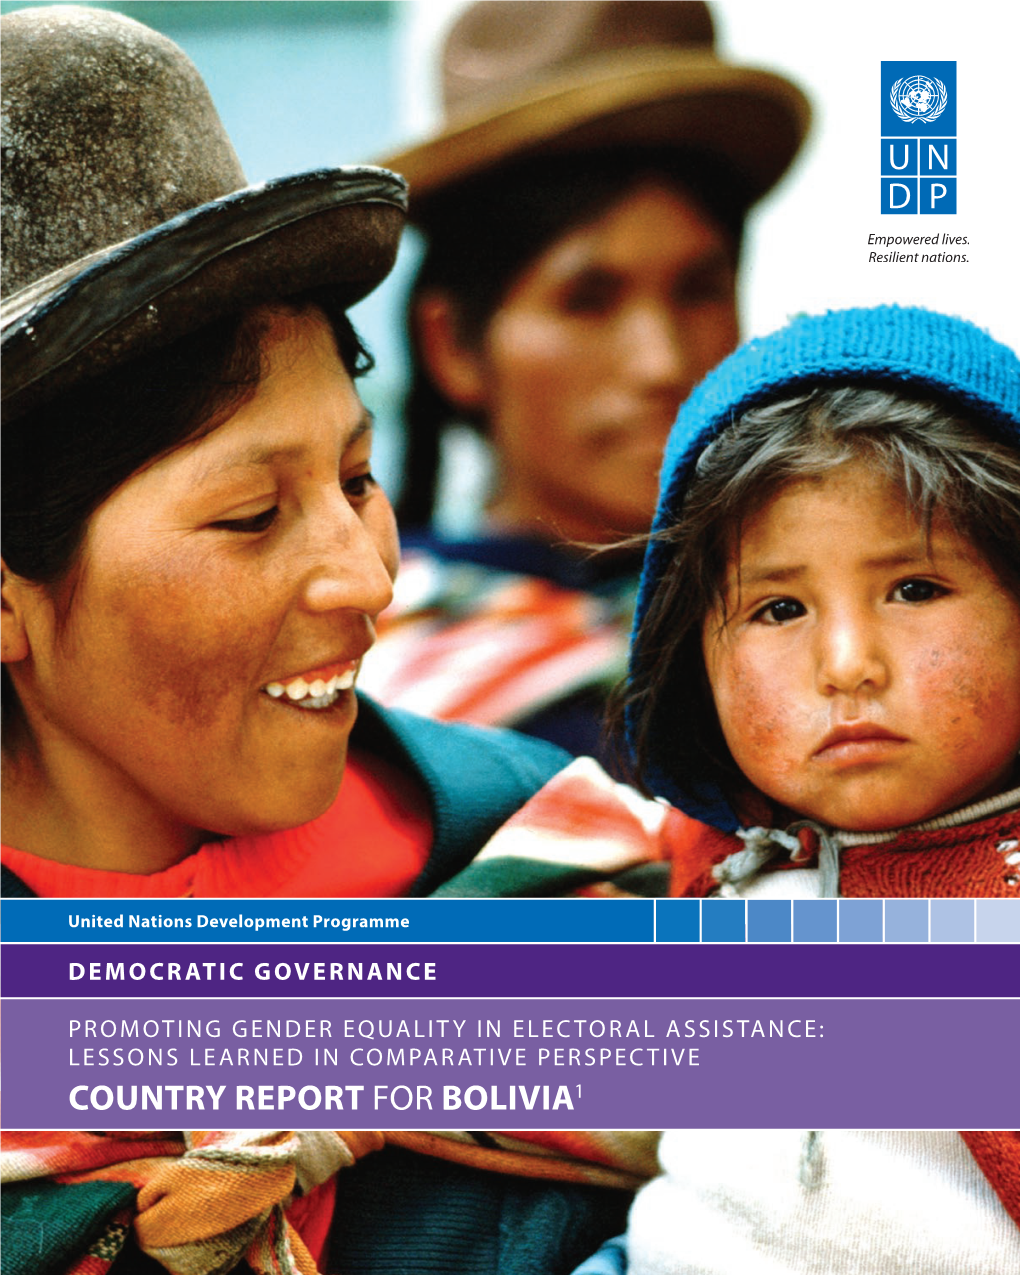 Country Report for BOLIVIA1 Cover Photo: UN Photo/John Isaac